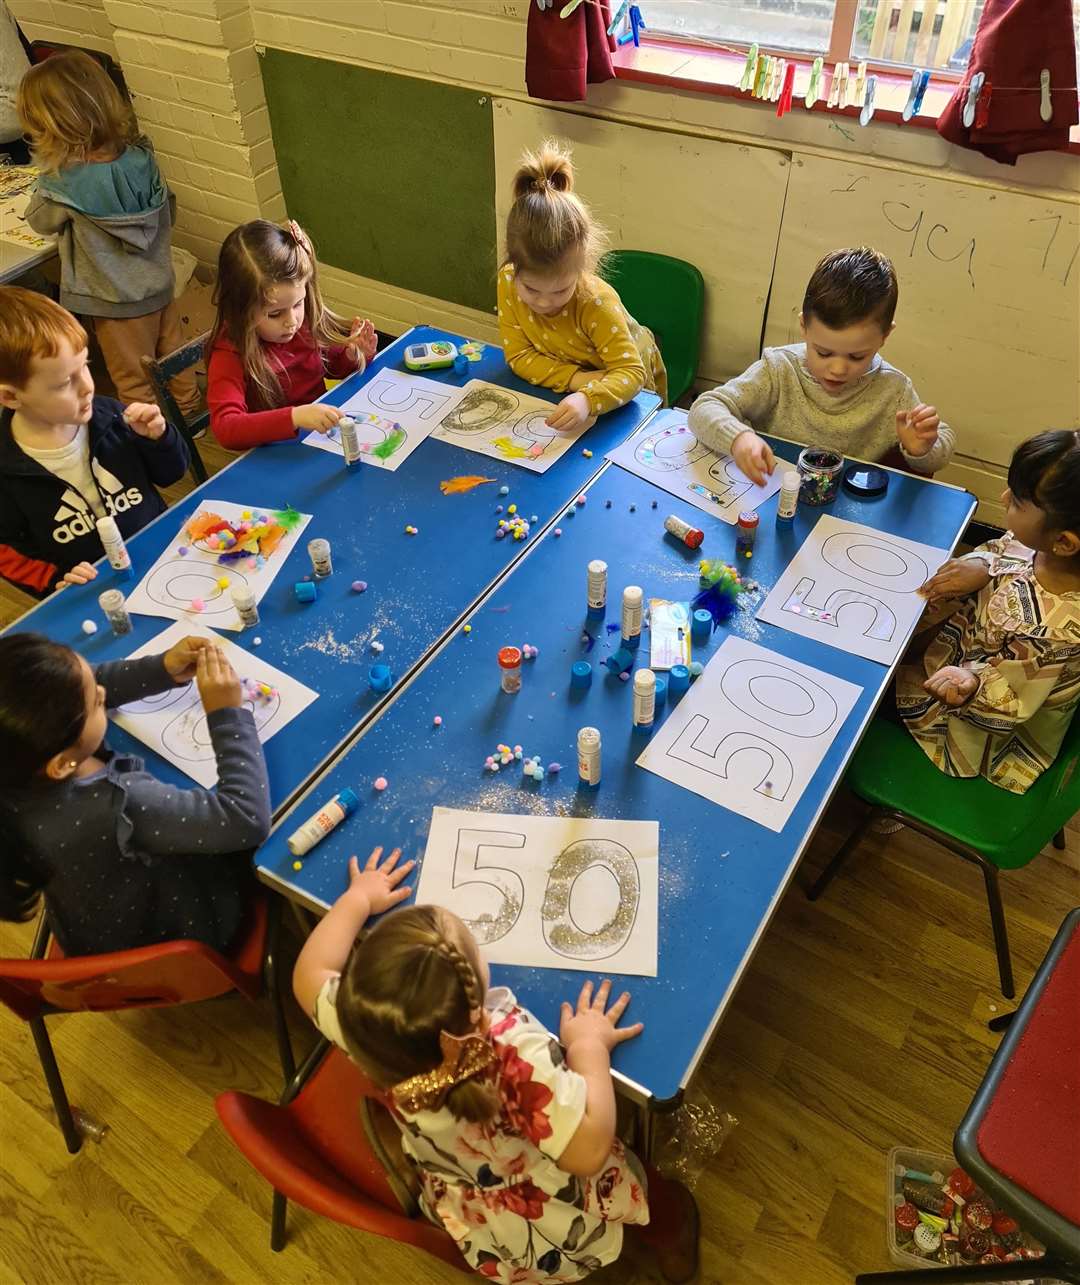 The Brent Playgroup in St Vincents Road, Dartford is celebrating its 50th anniversary. Photo: Kirsty Barden